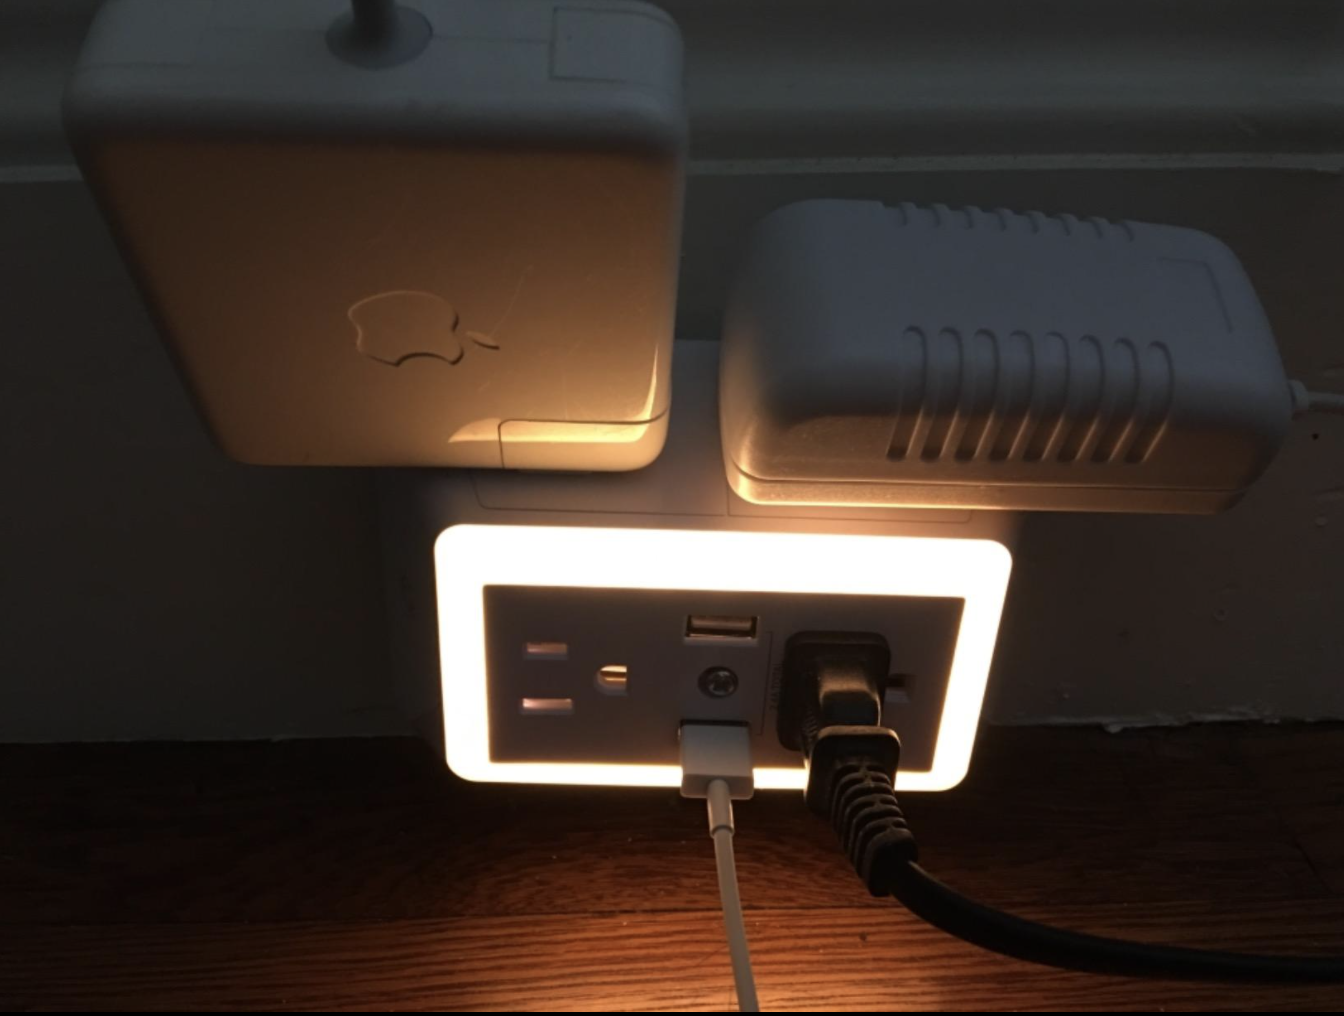 the outlet extender in use with nightlight on